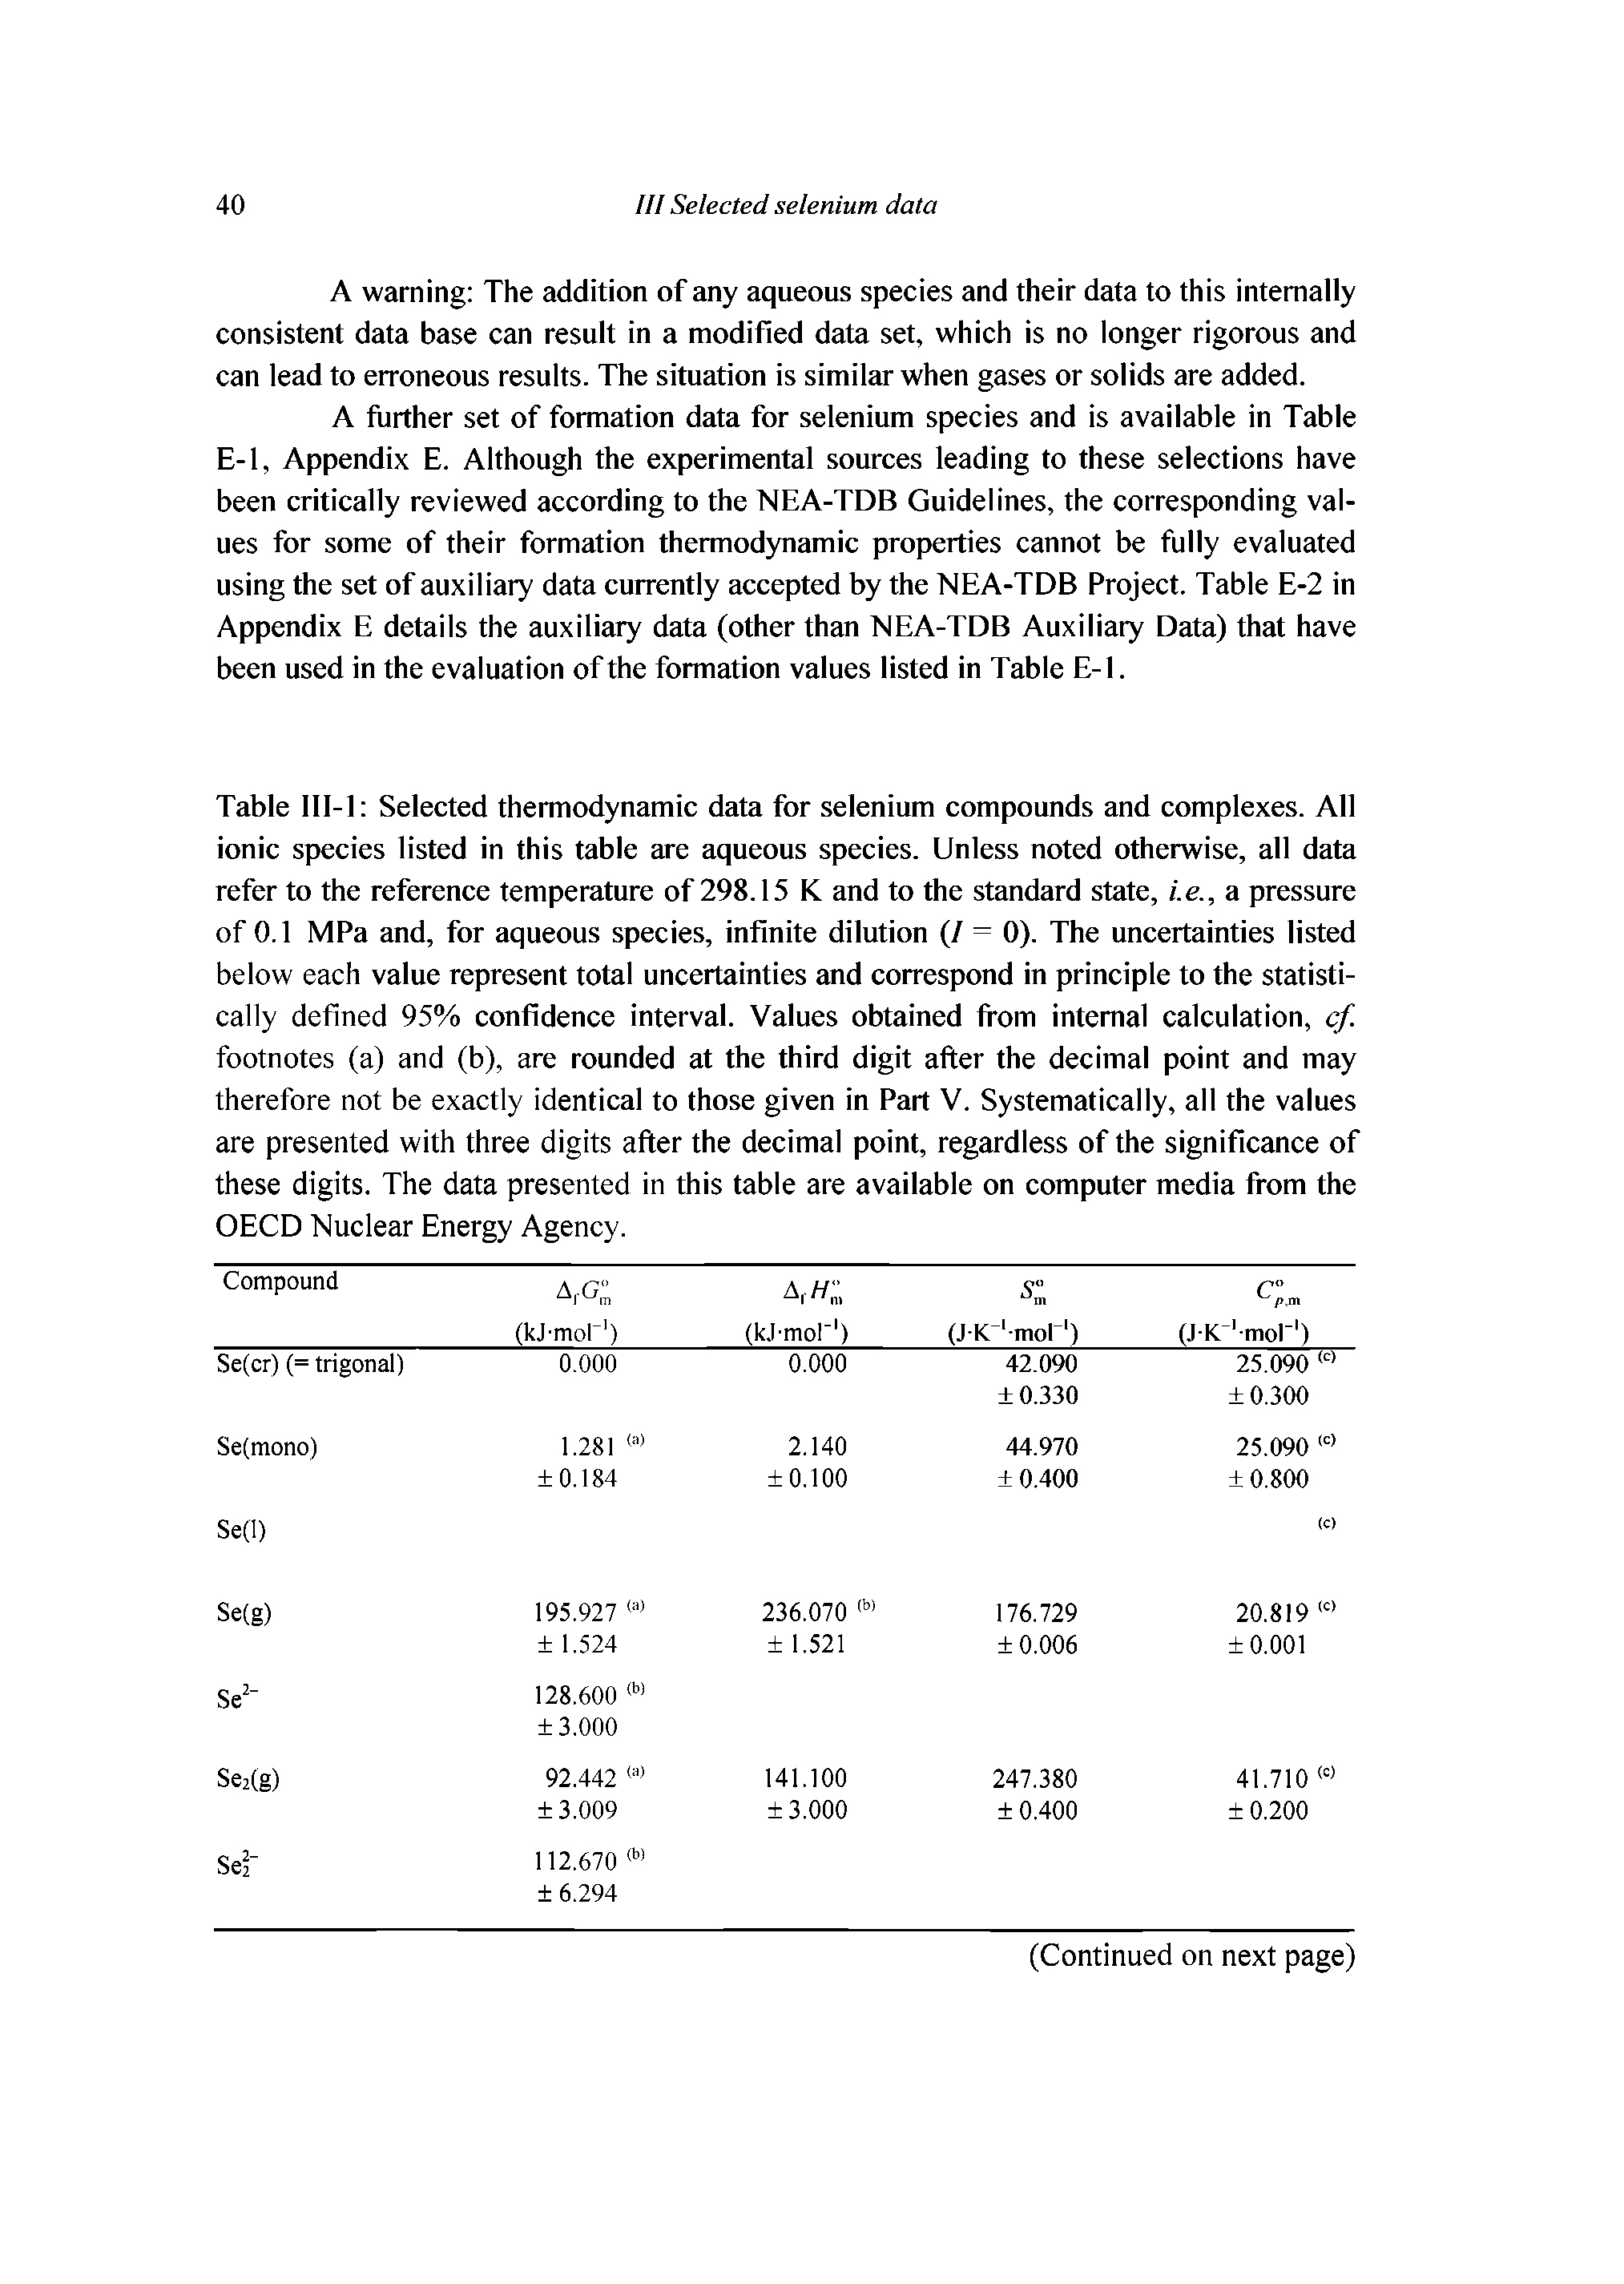 Table 111-1 Selected thermodynamic data for selenium compounds and complexes. All ionic species listed in this table are aqueous species. Unless noted otherwise, all data refer to the reference temperature of 298.15 K and to the standard state, i.e., a pressure of 0.1 MPa and, for aqueous species, infinite dilution (/ = 0). The uncertainties listed below each value represent total uncertainties and correspond in principle to the statistically defined 95% confidence interval. Values obtained from internal calculation, cf. footnotes (a) and (b), are rounded at the third digit after the decimal point and may therefore not be exactly identical to those given in Part V. Systematically, all the values are presented with three digits after the decimal point, regardless of the significance of these digits. The data presented in this table are available on computer media from the OECD Nuclear Energy Agency.